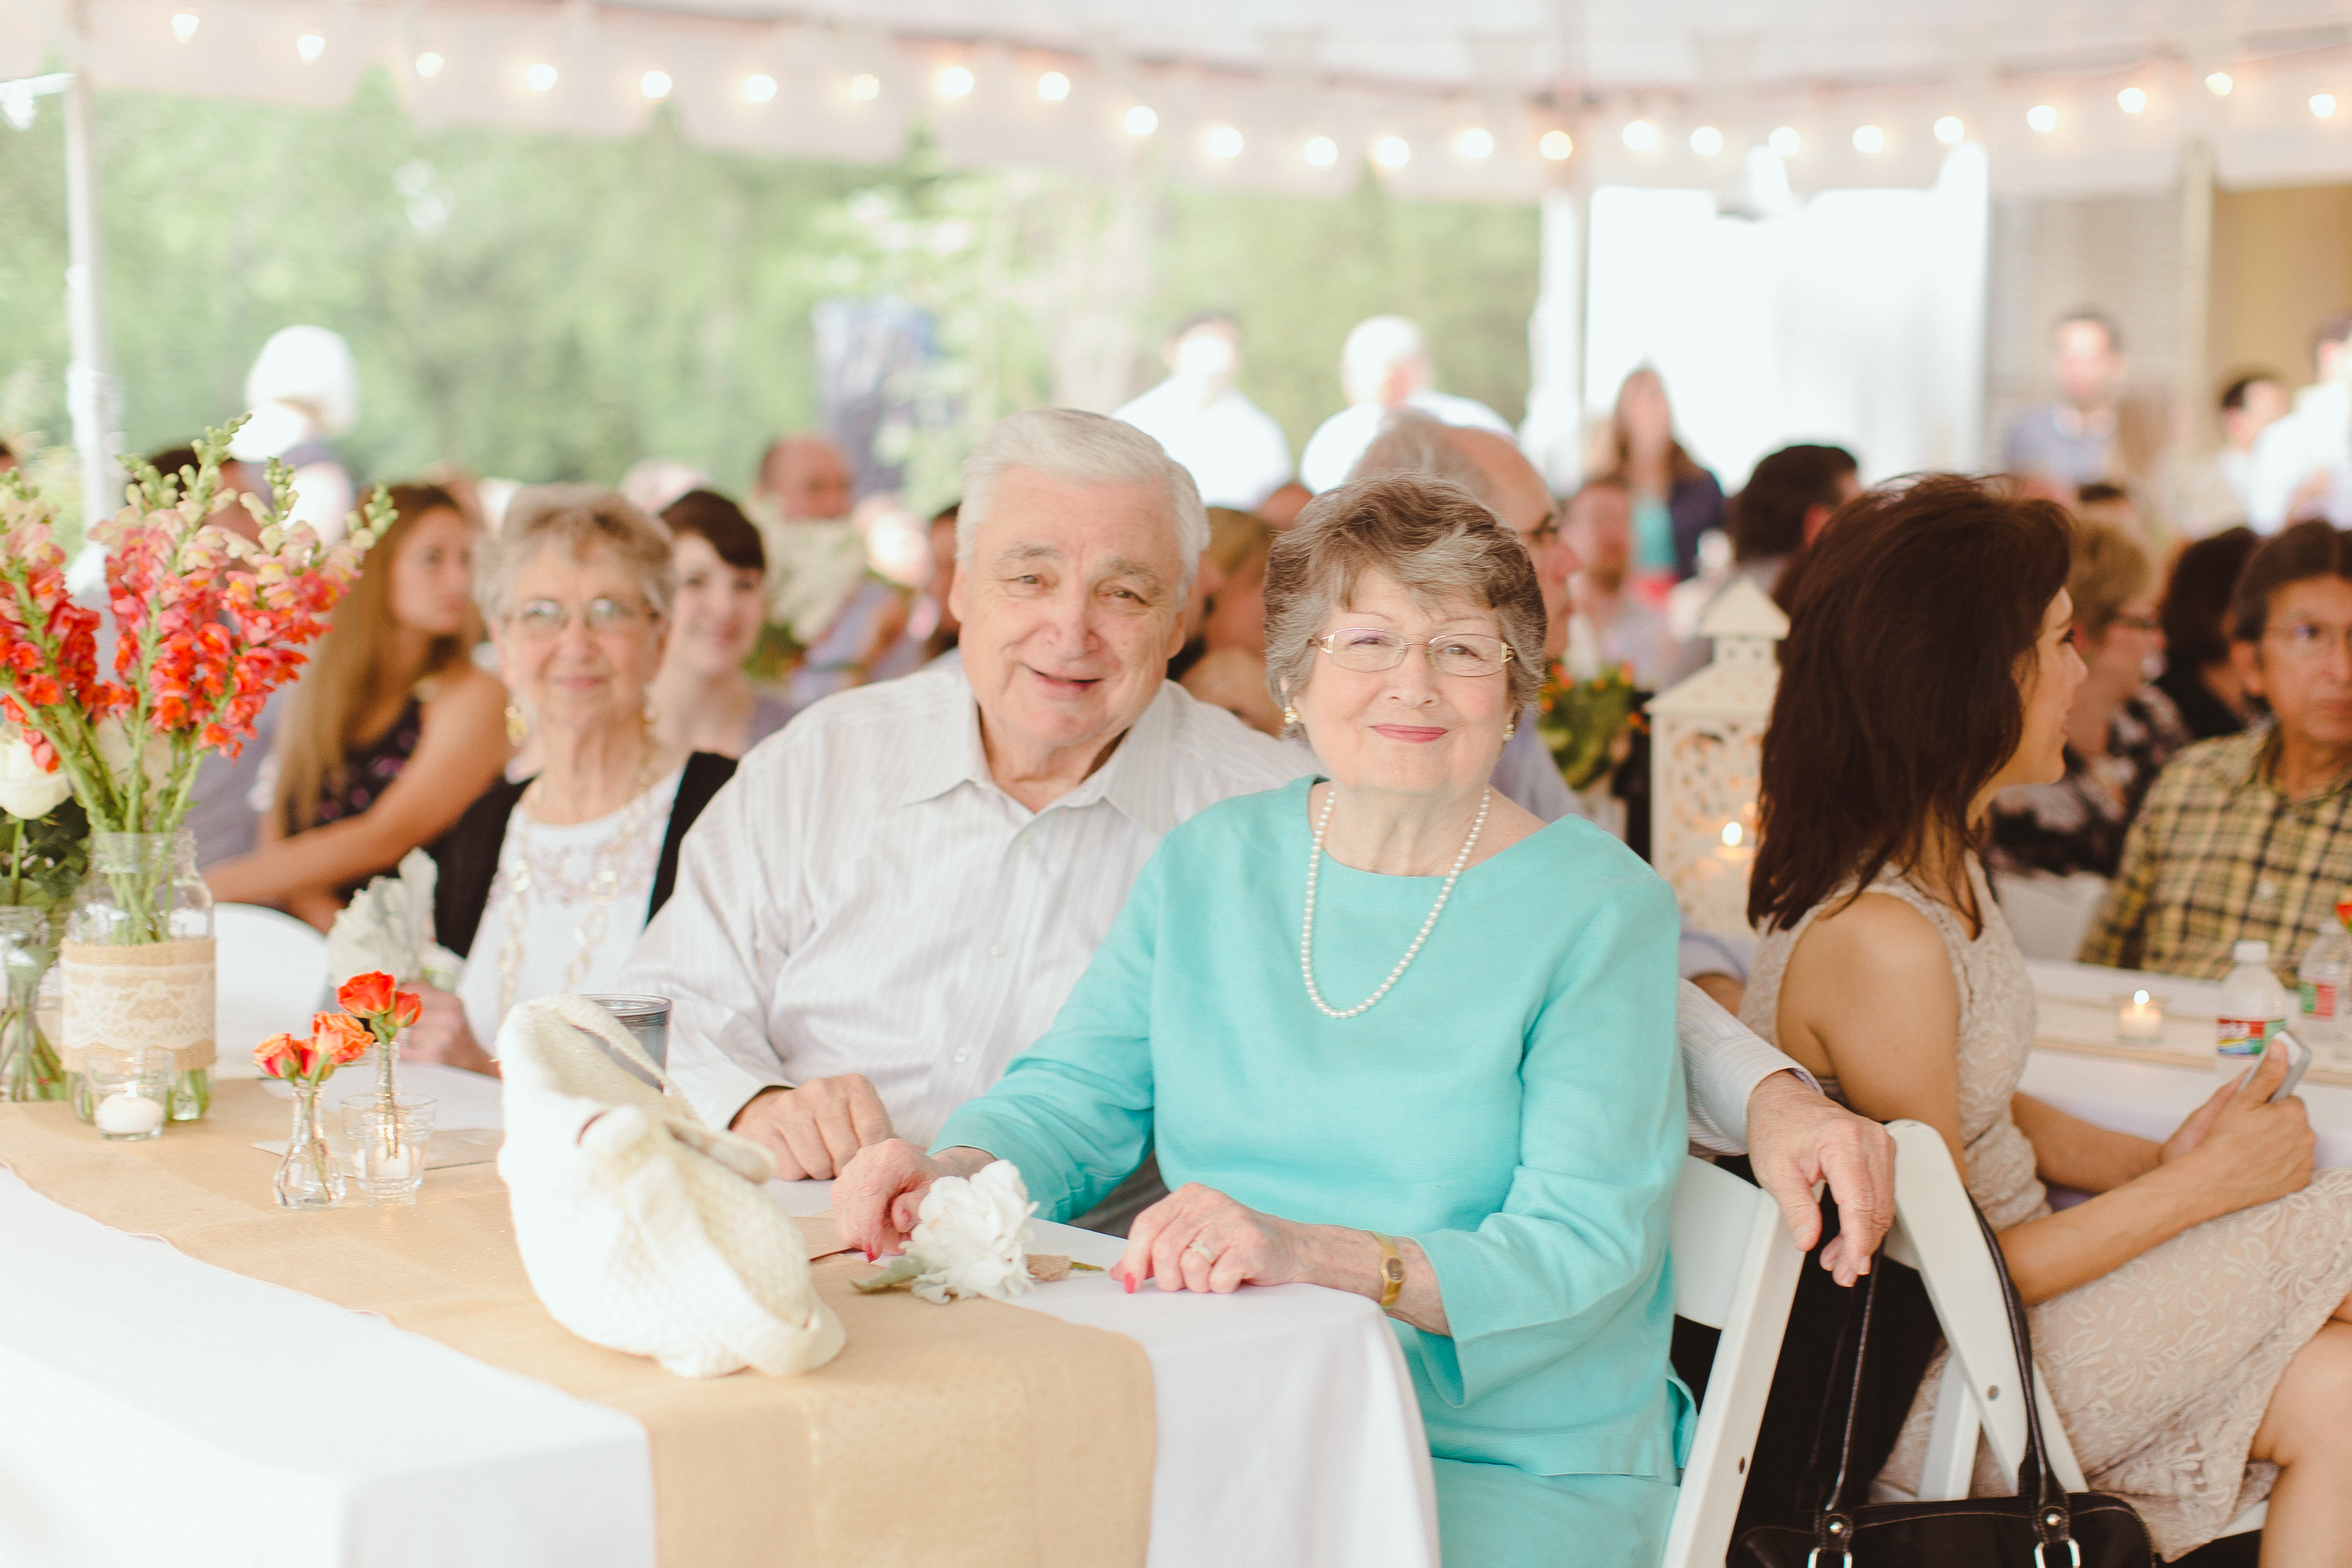 This picture of my Mom and Dad was taken two years ago at my son J.J.'s wedding (and that's Bill's sweet mom behind my dad).